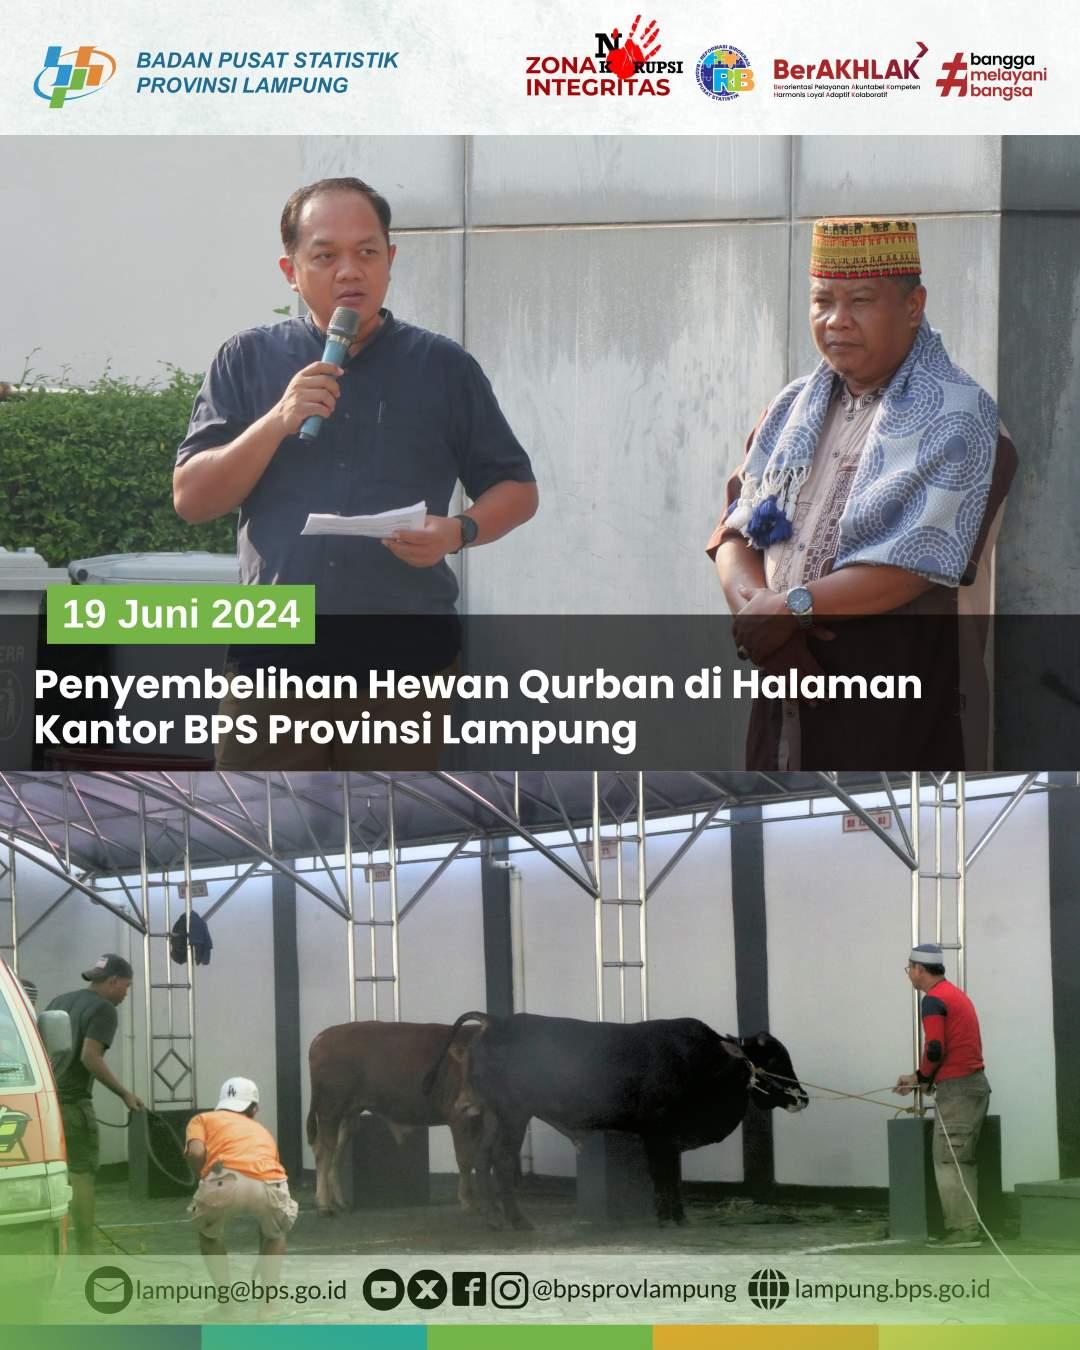 Cattle slaughter in the yard of BPS-Statistics Lampung Province 